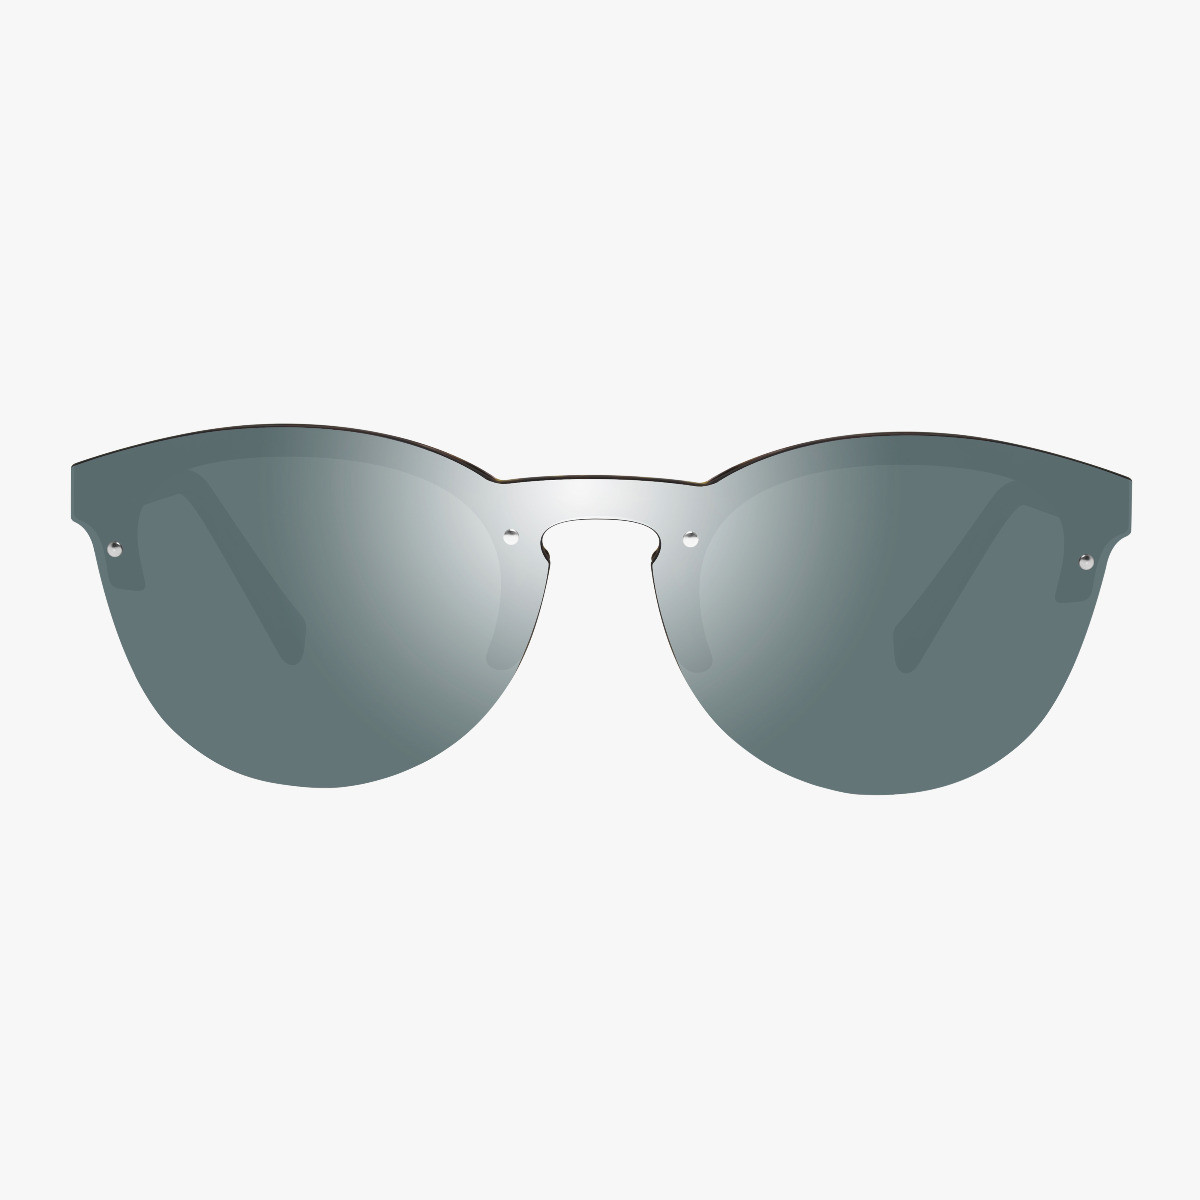 Scicon Sports | Protector Lifestyle Unisex Sunglasses - Demi Frame, Silver Lens - EY170806